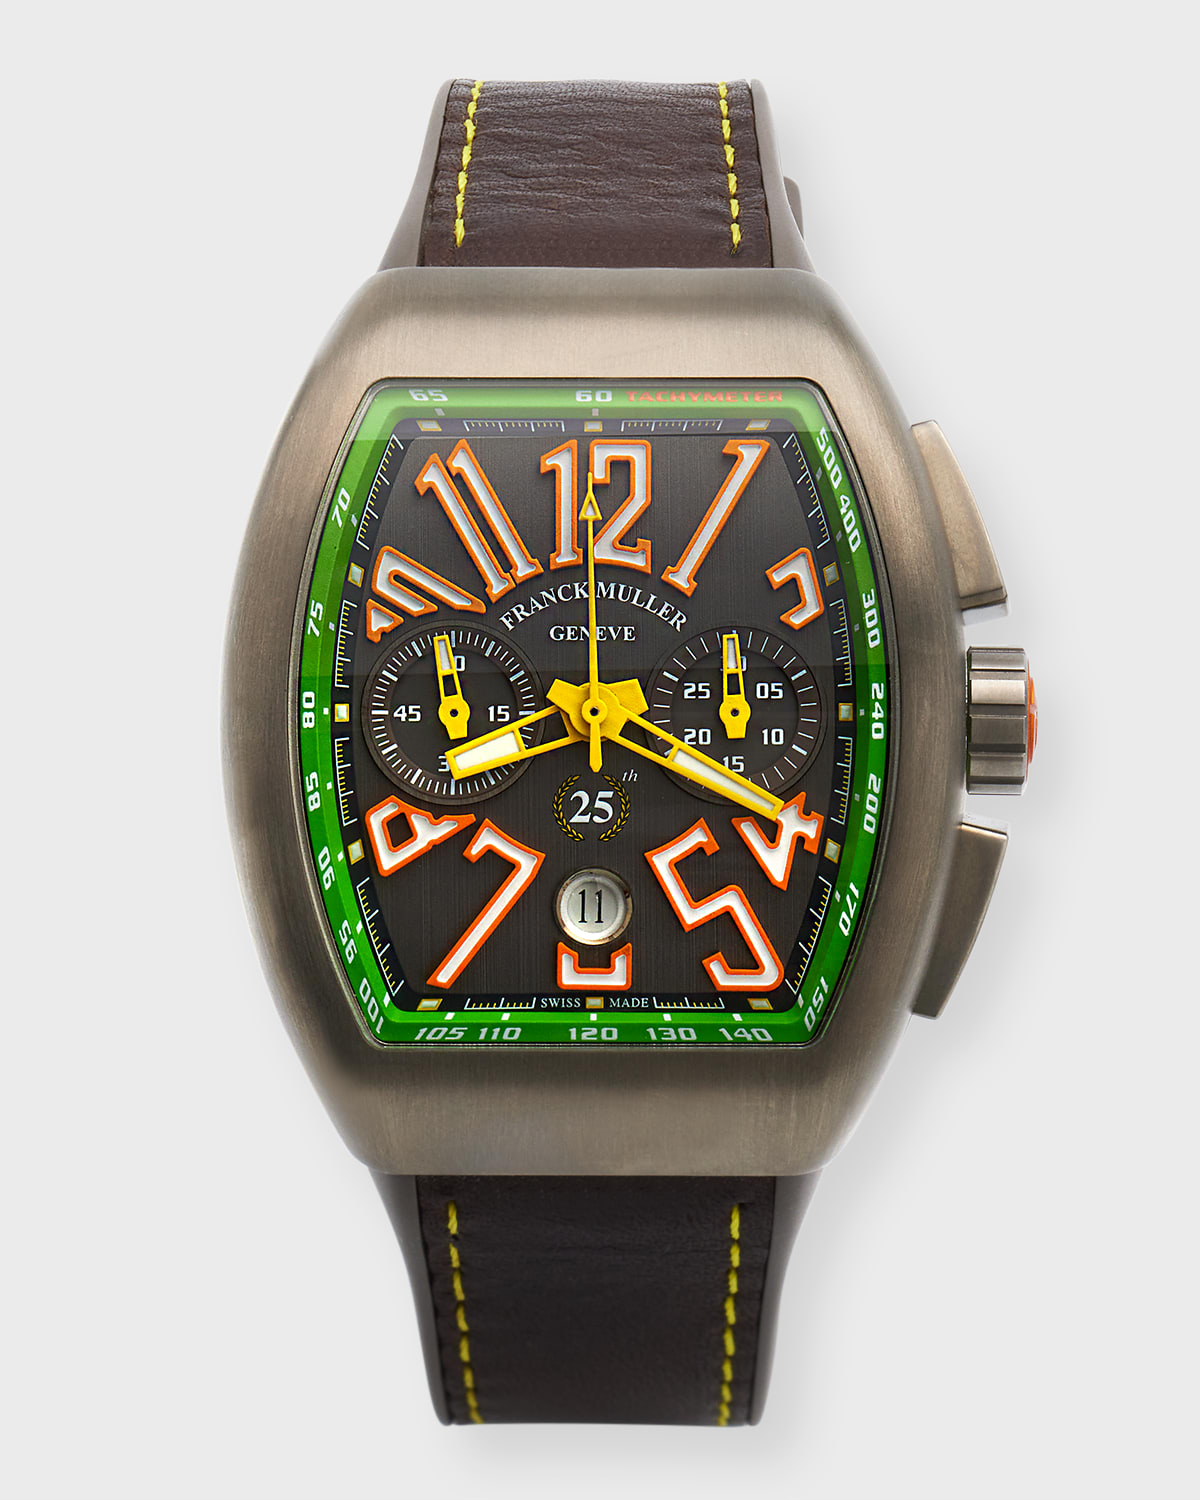 Franck Muller Men's Limited Edition Titanium Vanguard Chronograph Watch, Green In Brown